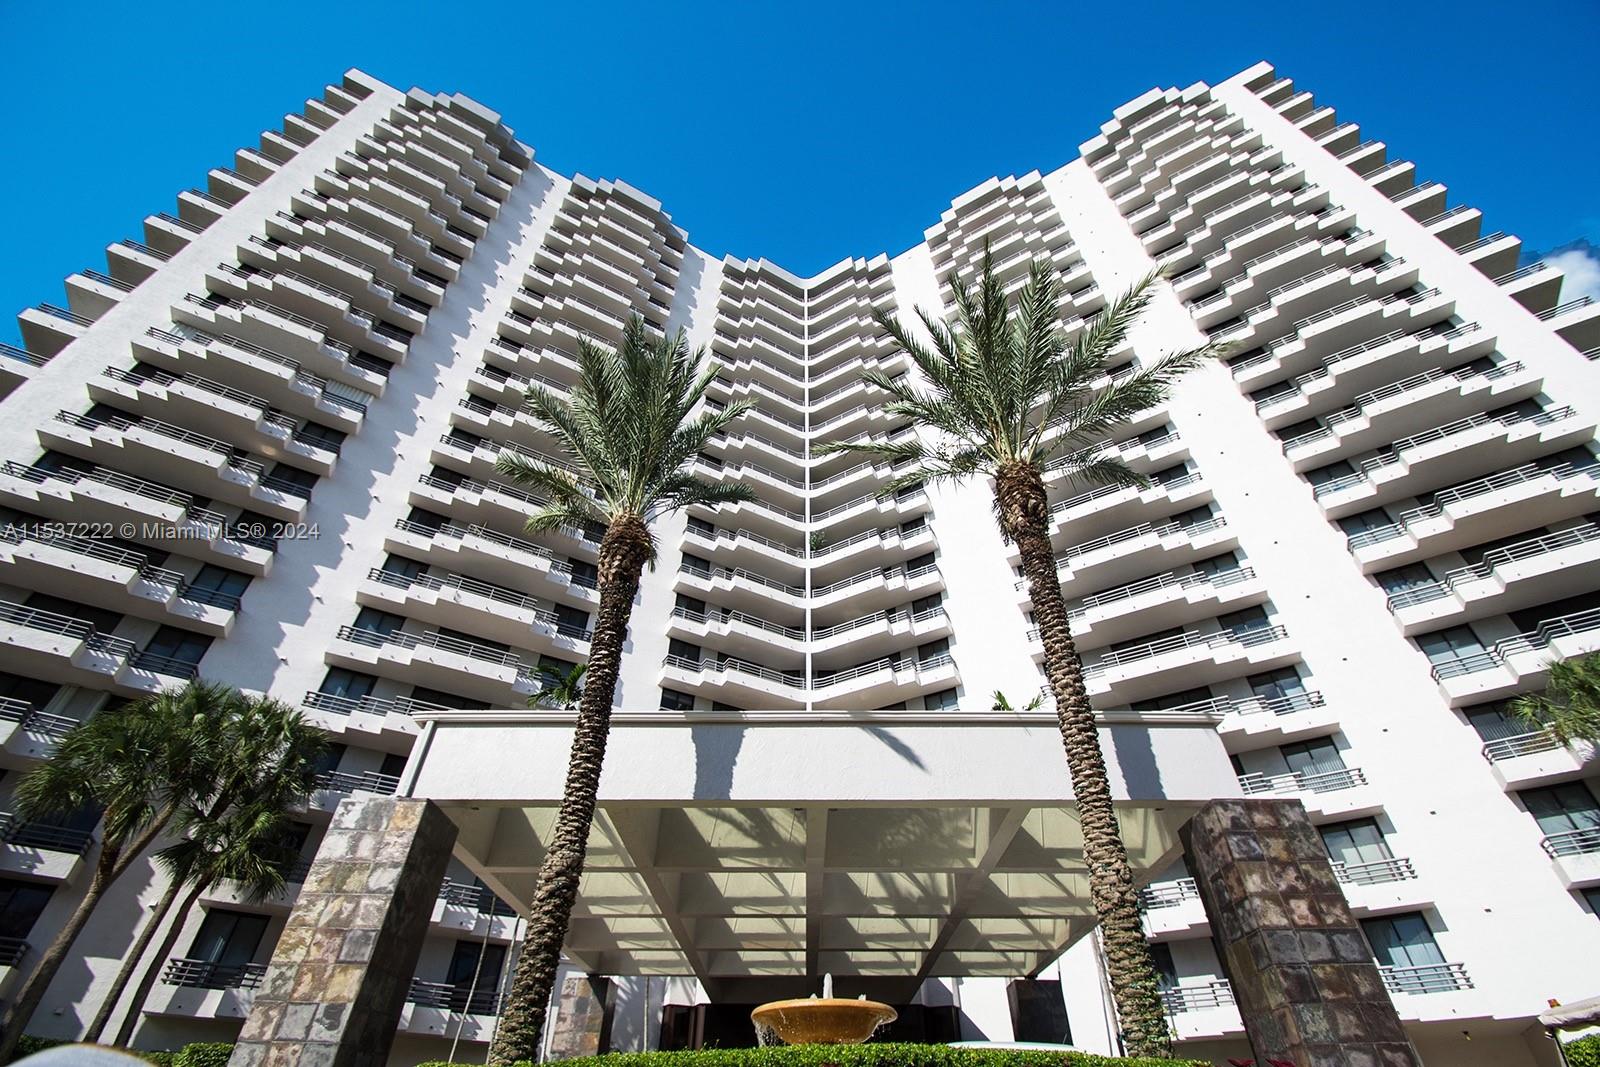 Parc Central East in Aventura, Florida, stands out for its elegance and prime location, offering views of the Turnberry Isle Country Club and Aventura Mall. It features spacious apartments with modern kitchens and ample storage. Amenities include lagoon-style pools, jacuzzis, a state-of-the-art gym, volleyball court, and 24-hour valet service, making it ideal for those seeking an exclusive lifestyle in the heart of Aventura